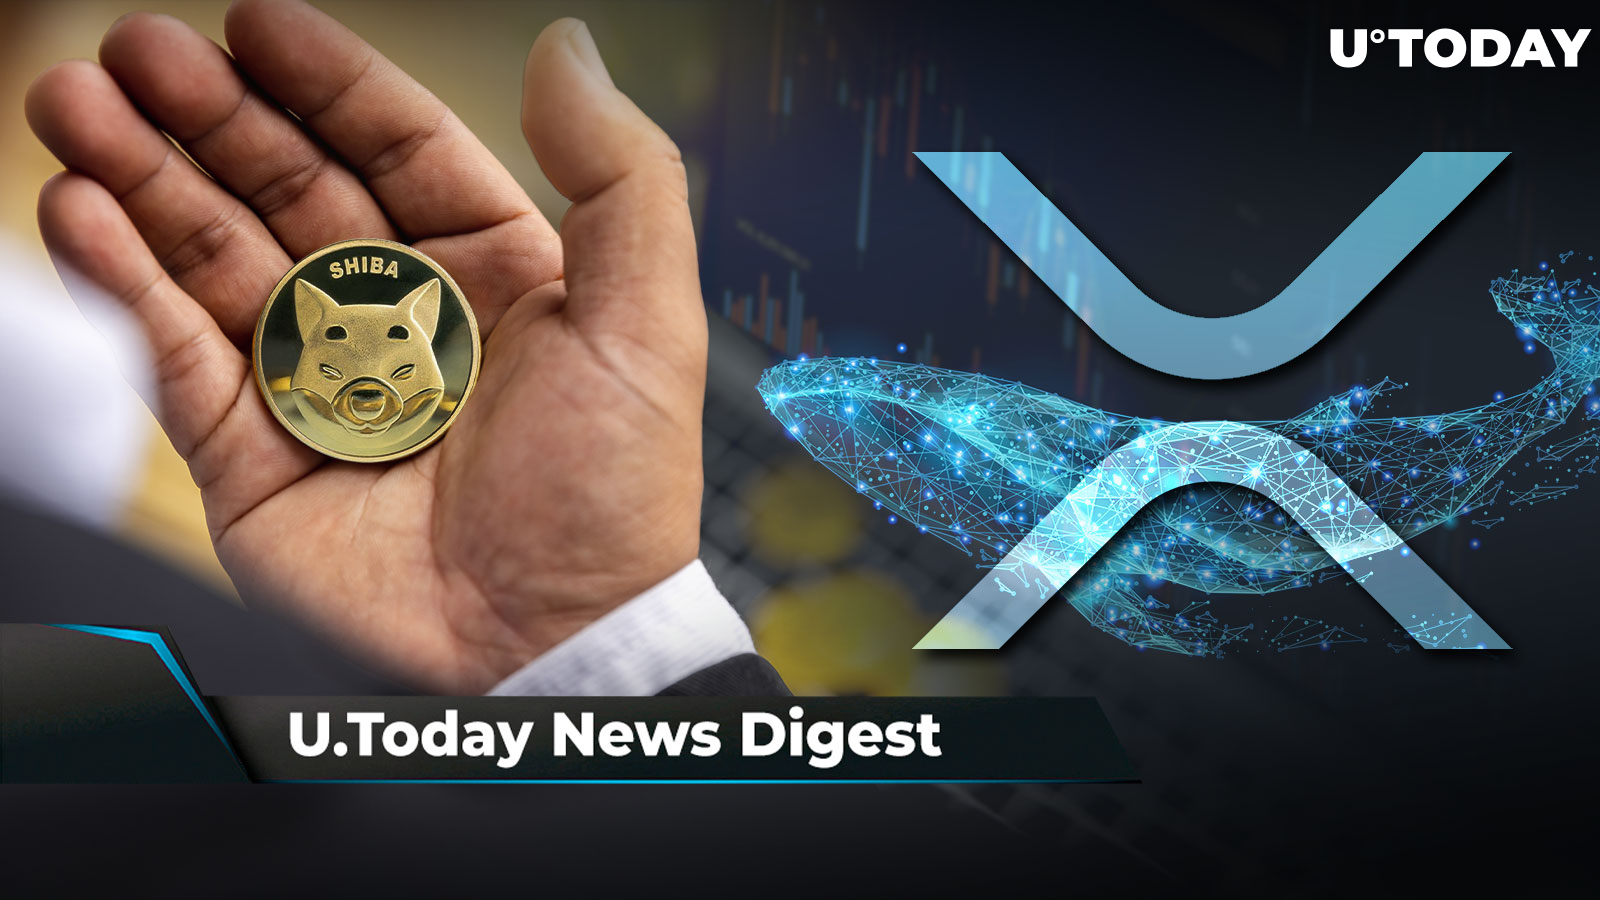 Millionaire XRP Whales Quickly Increase Holdings, Binance Sees $2 Billion Outflow After Criminal Charges News, SHIB Back on Investors’ Radar: Crypto News Digest by U.Today